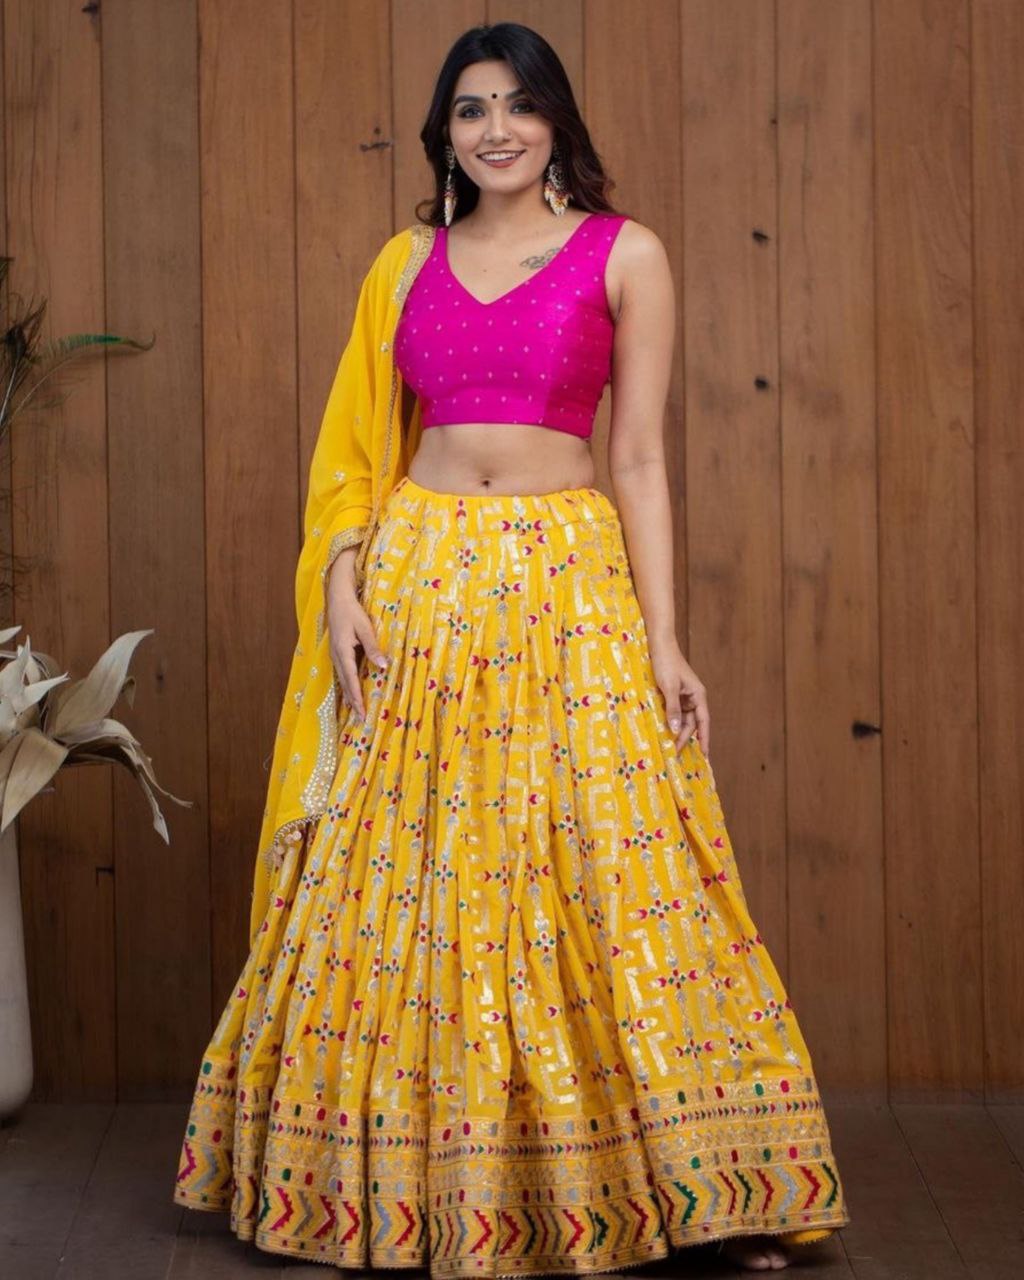 The Contrast Lehengas: Adding More Color to Your Lehenga